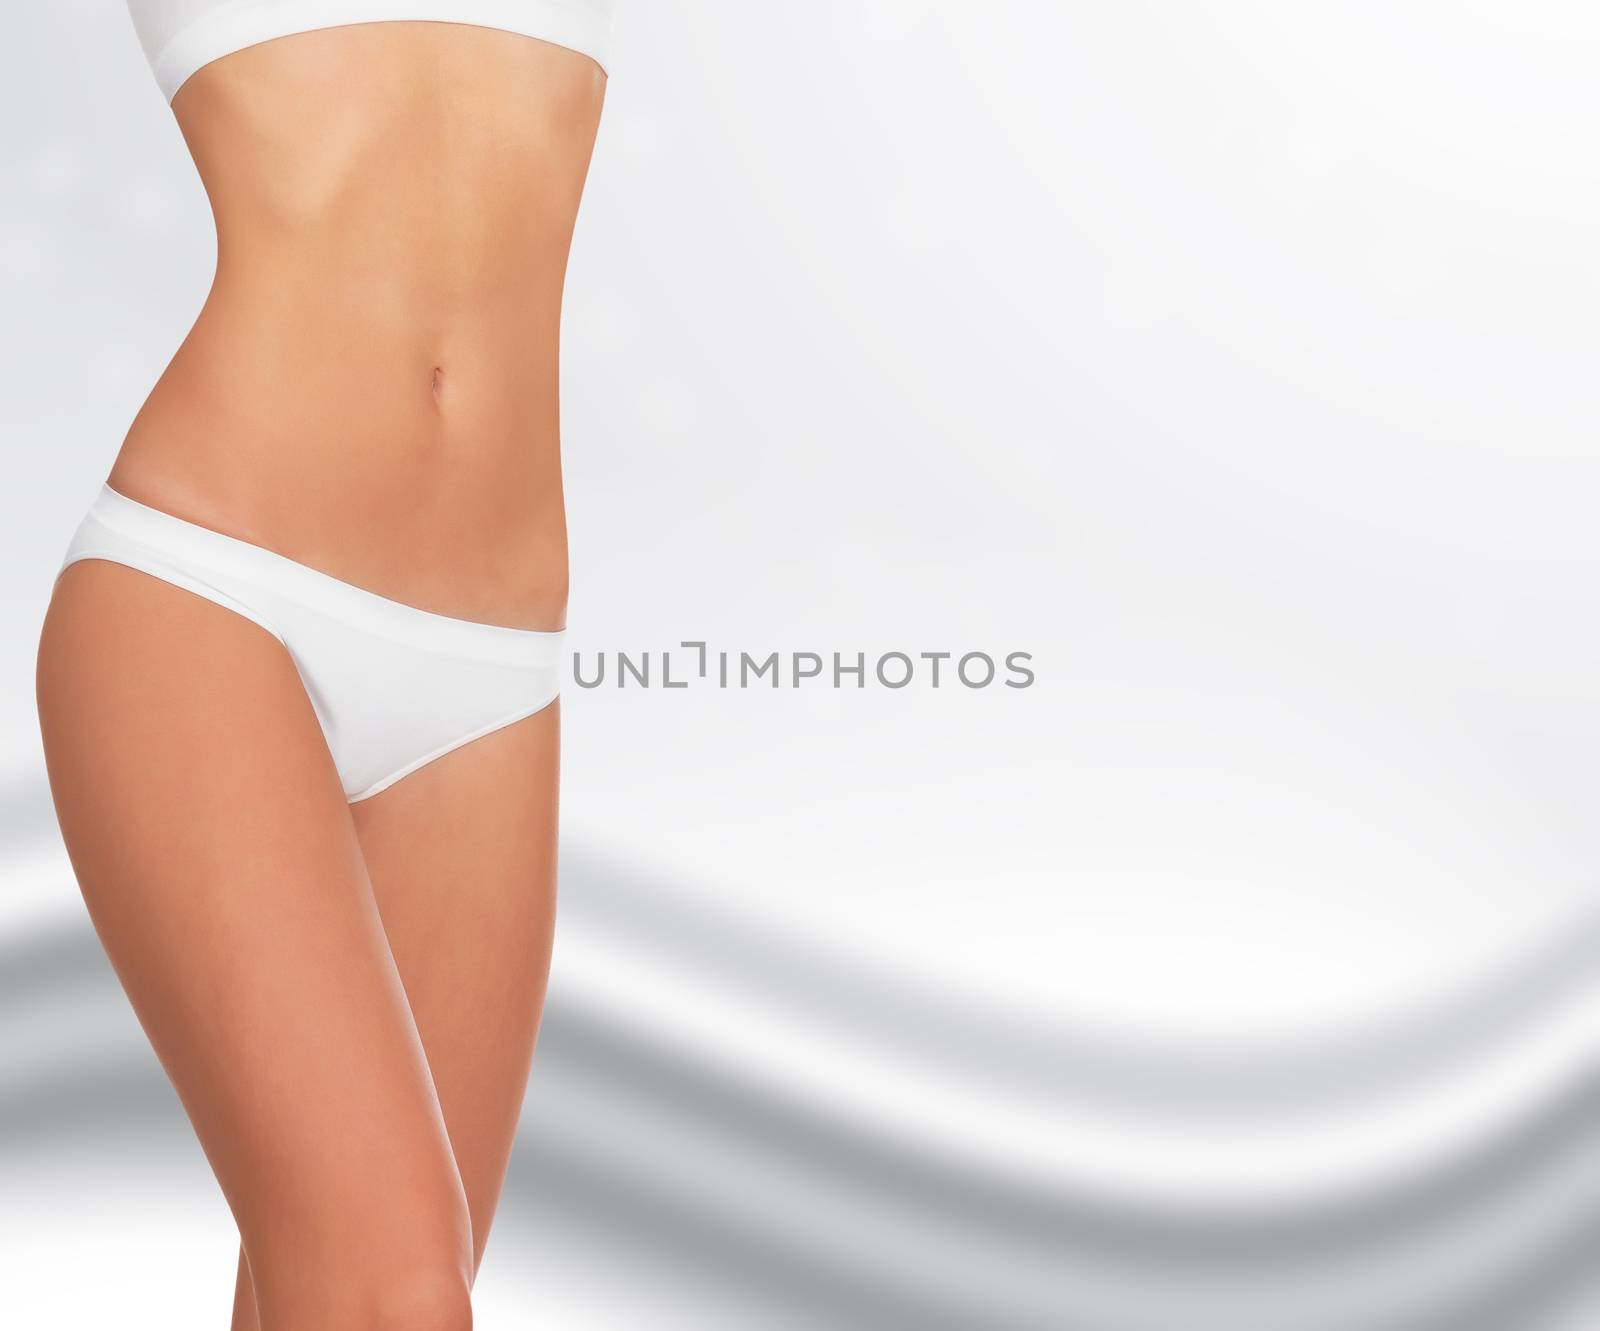 Slim woman against abstract background by Nobilior